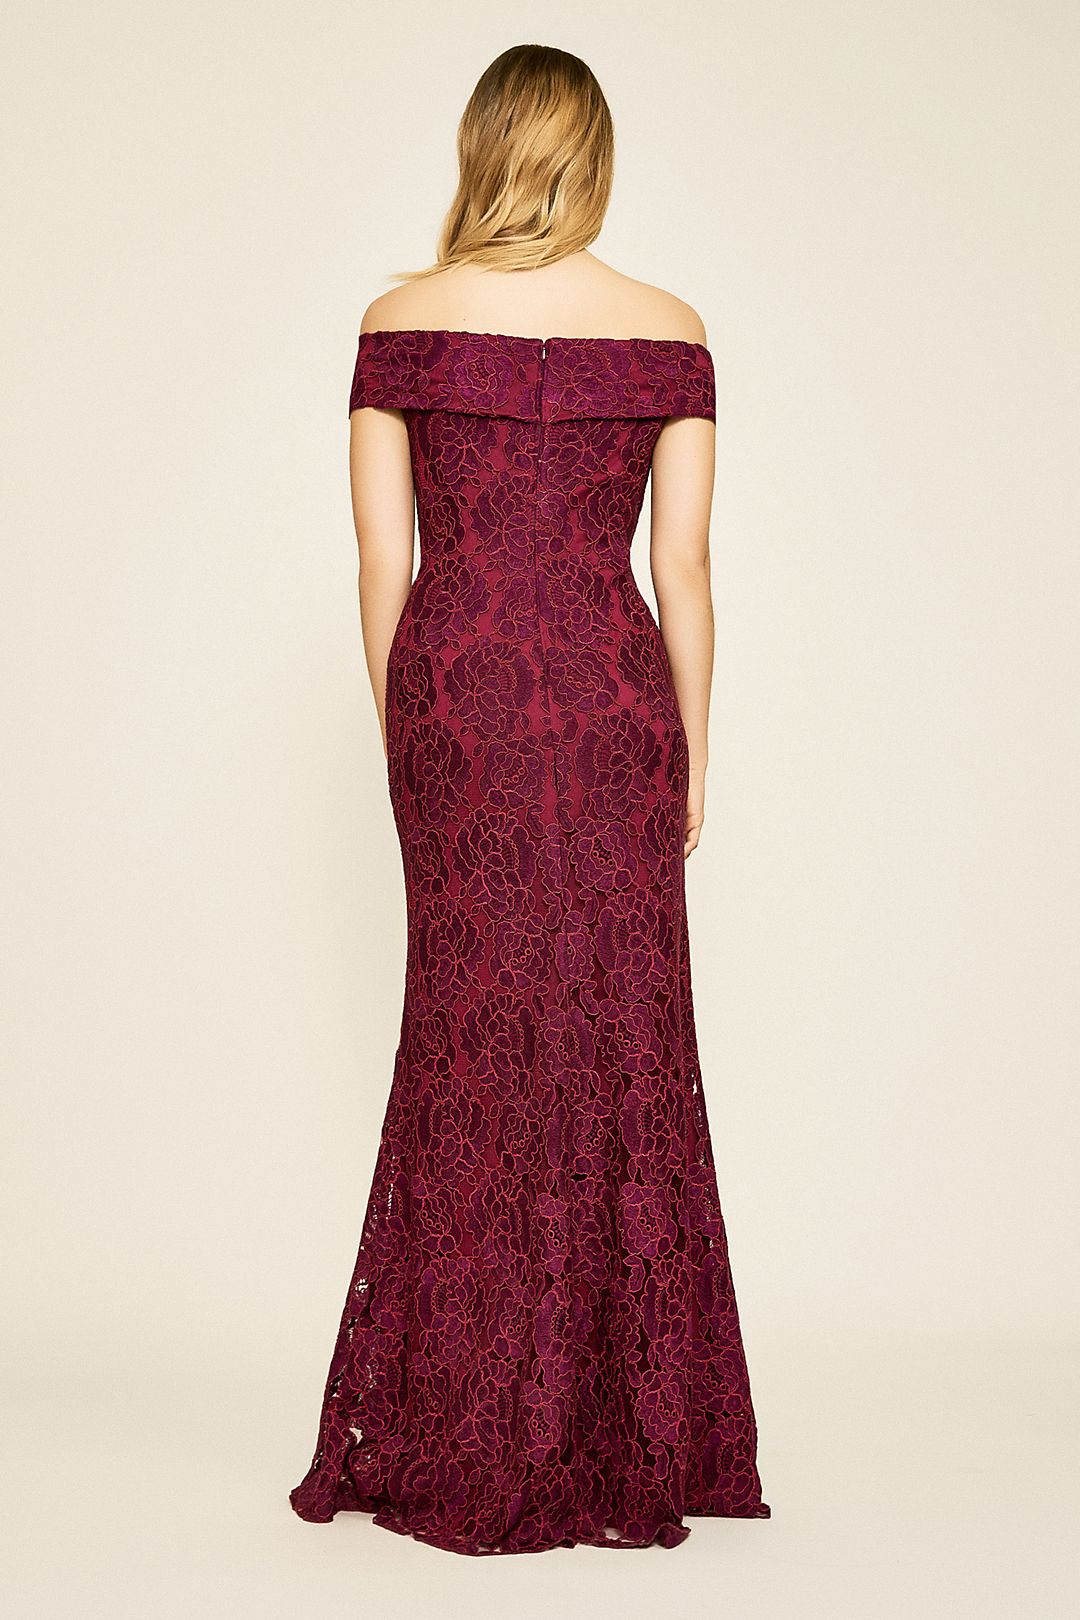 Sangria Embroidered Lace Off-the-Shoulder Gown Image 4